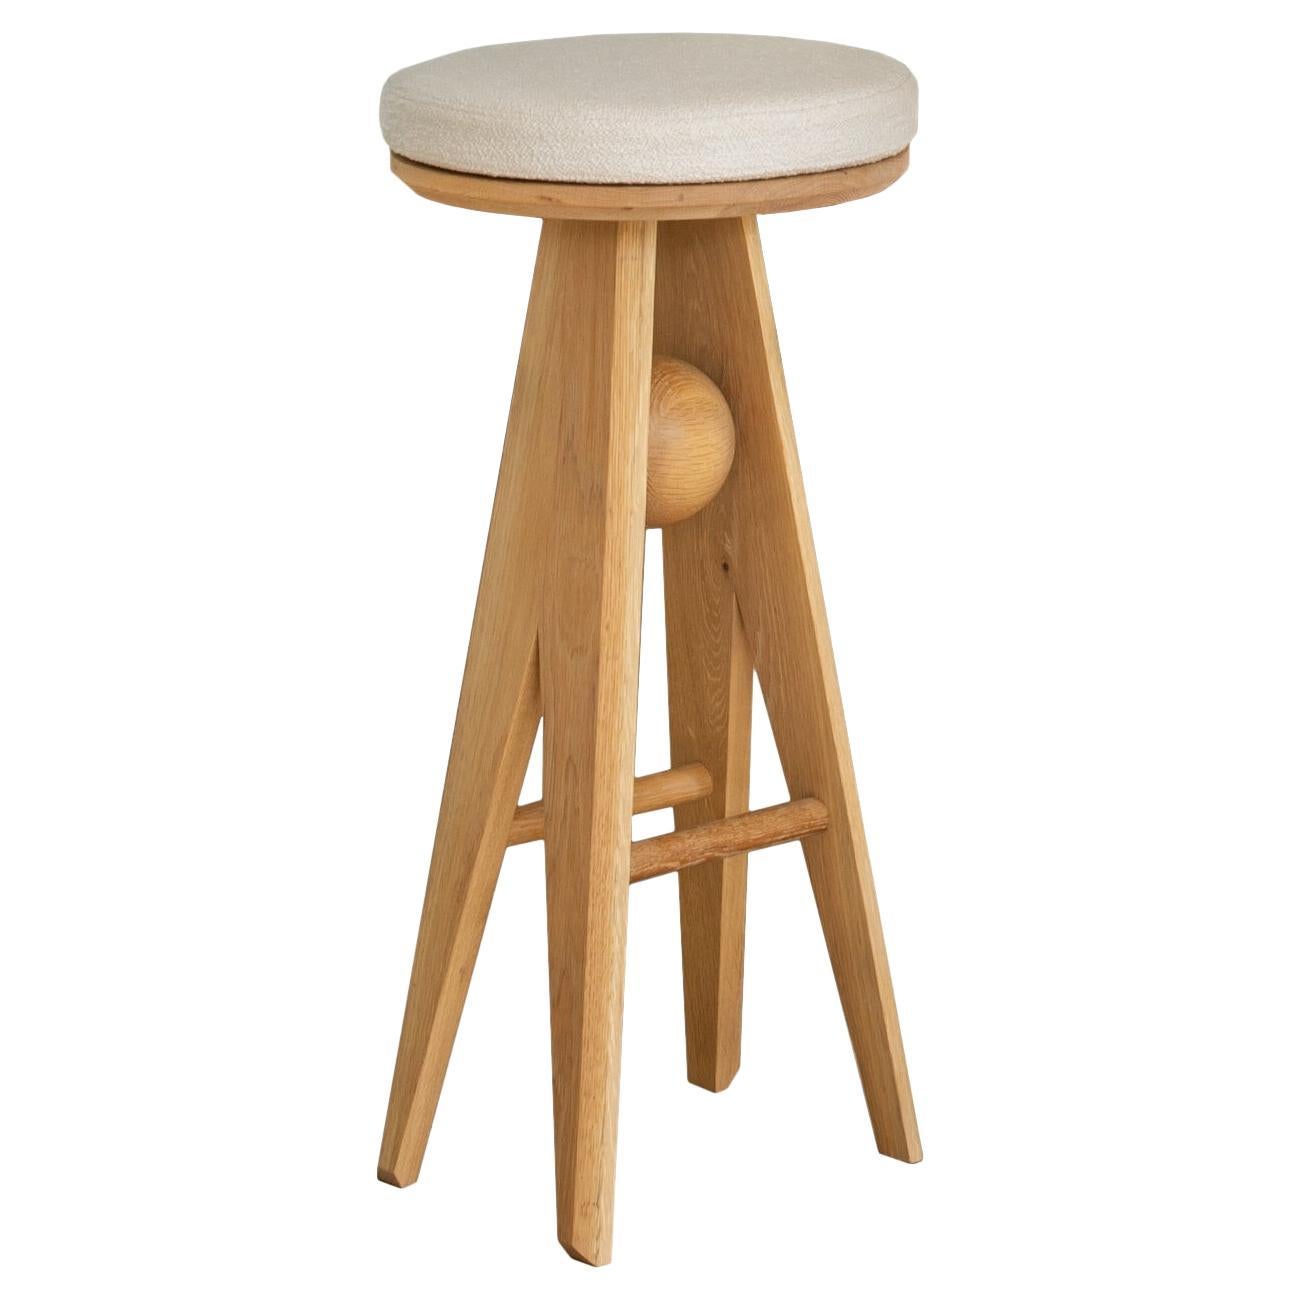 Set Basurto 01 High Stools - Contemporary Wooden and Fabric